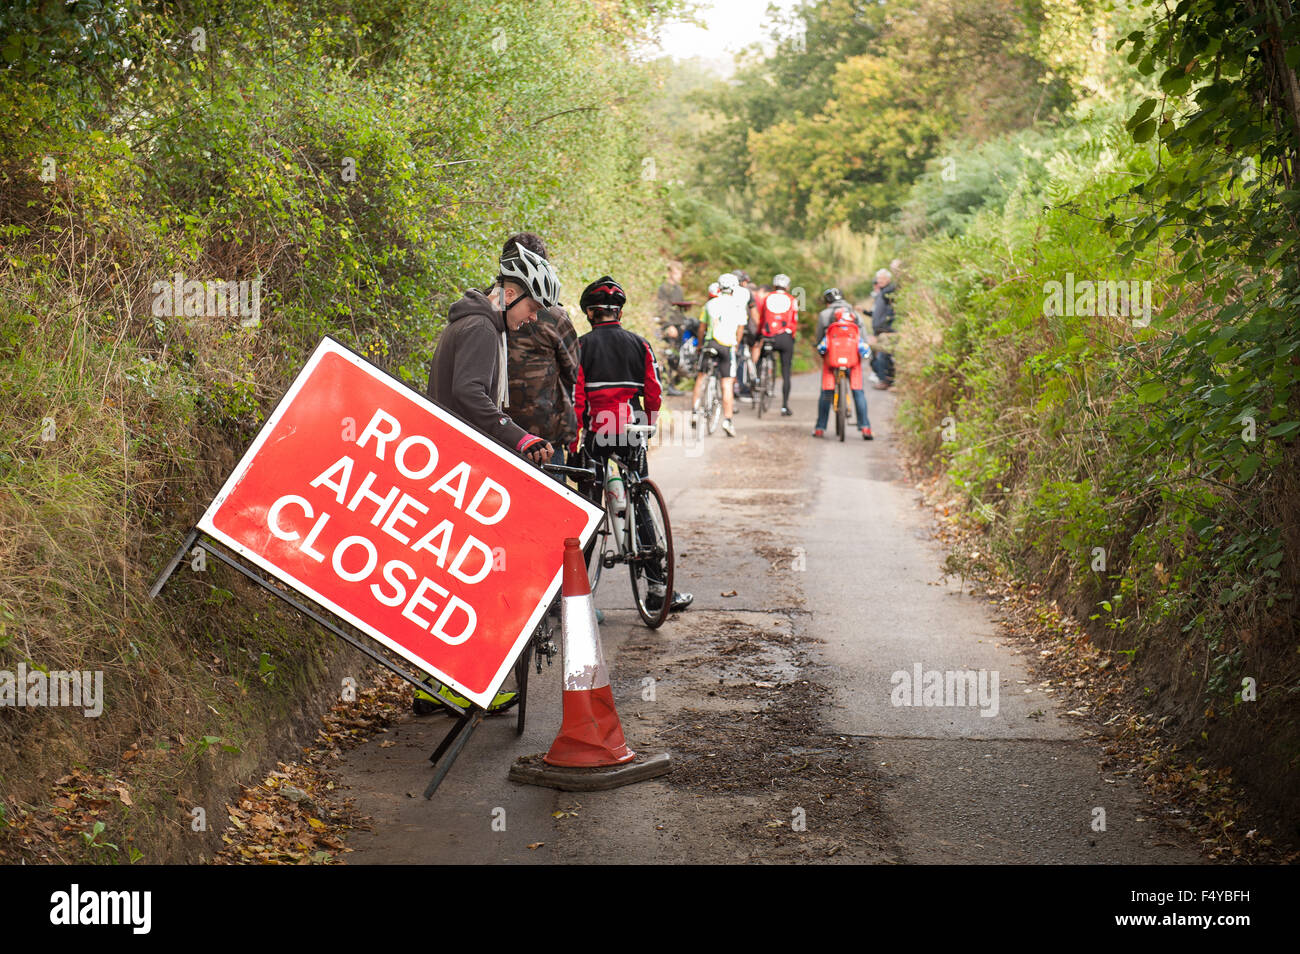 Road closure sign start of Catford hill climb bottom of york hill bike race against the clock cyclists waiting Stock Photo